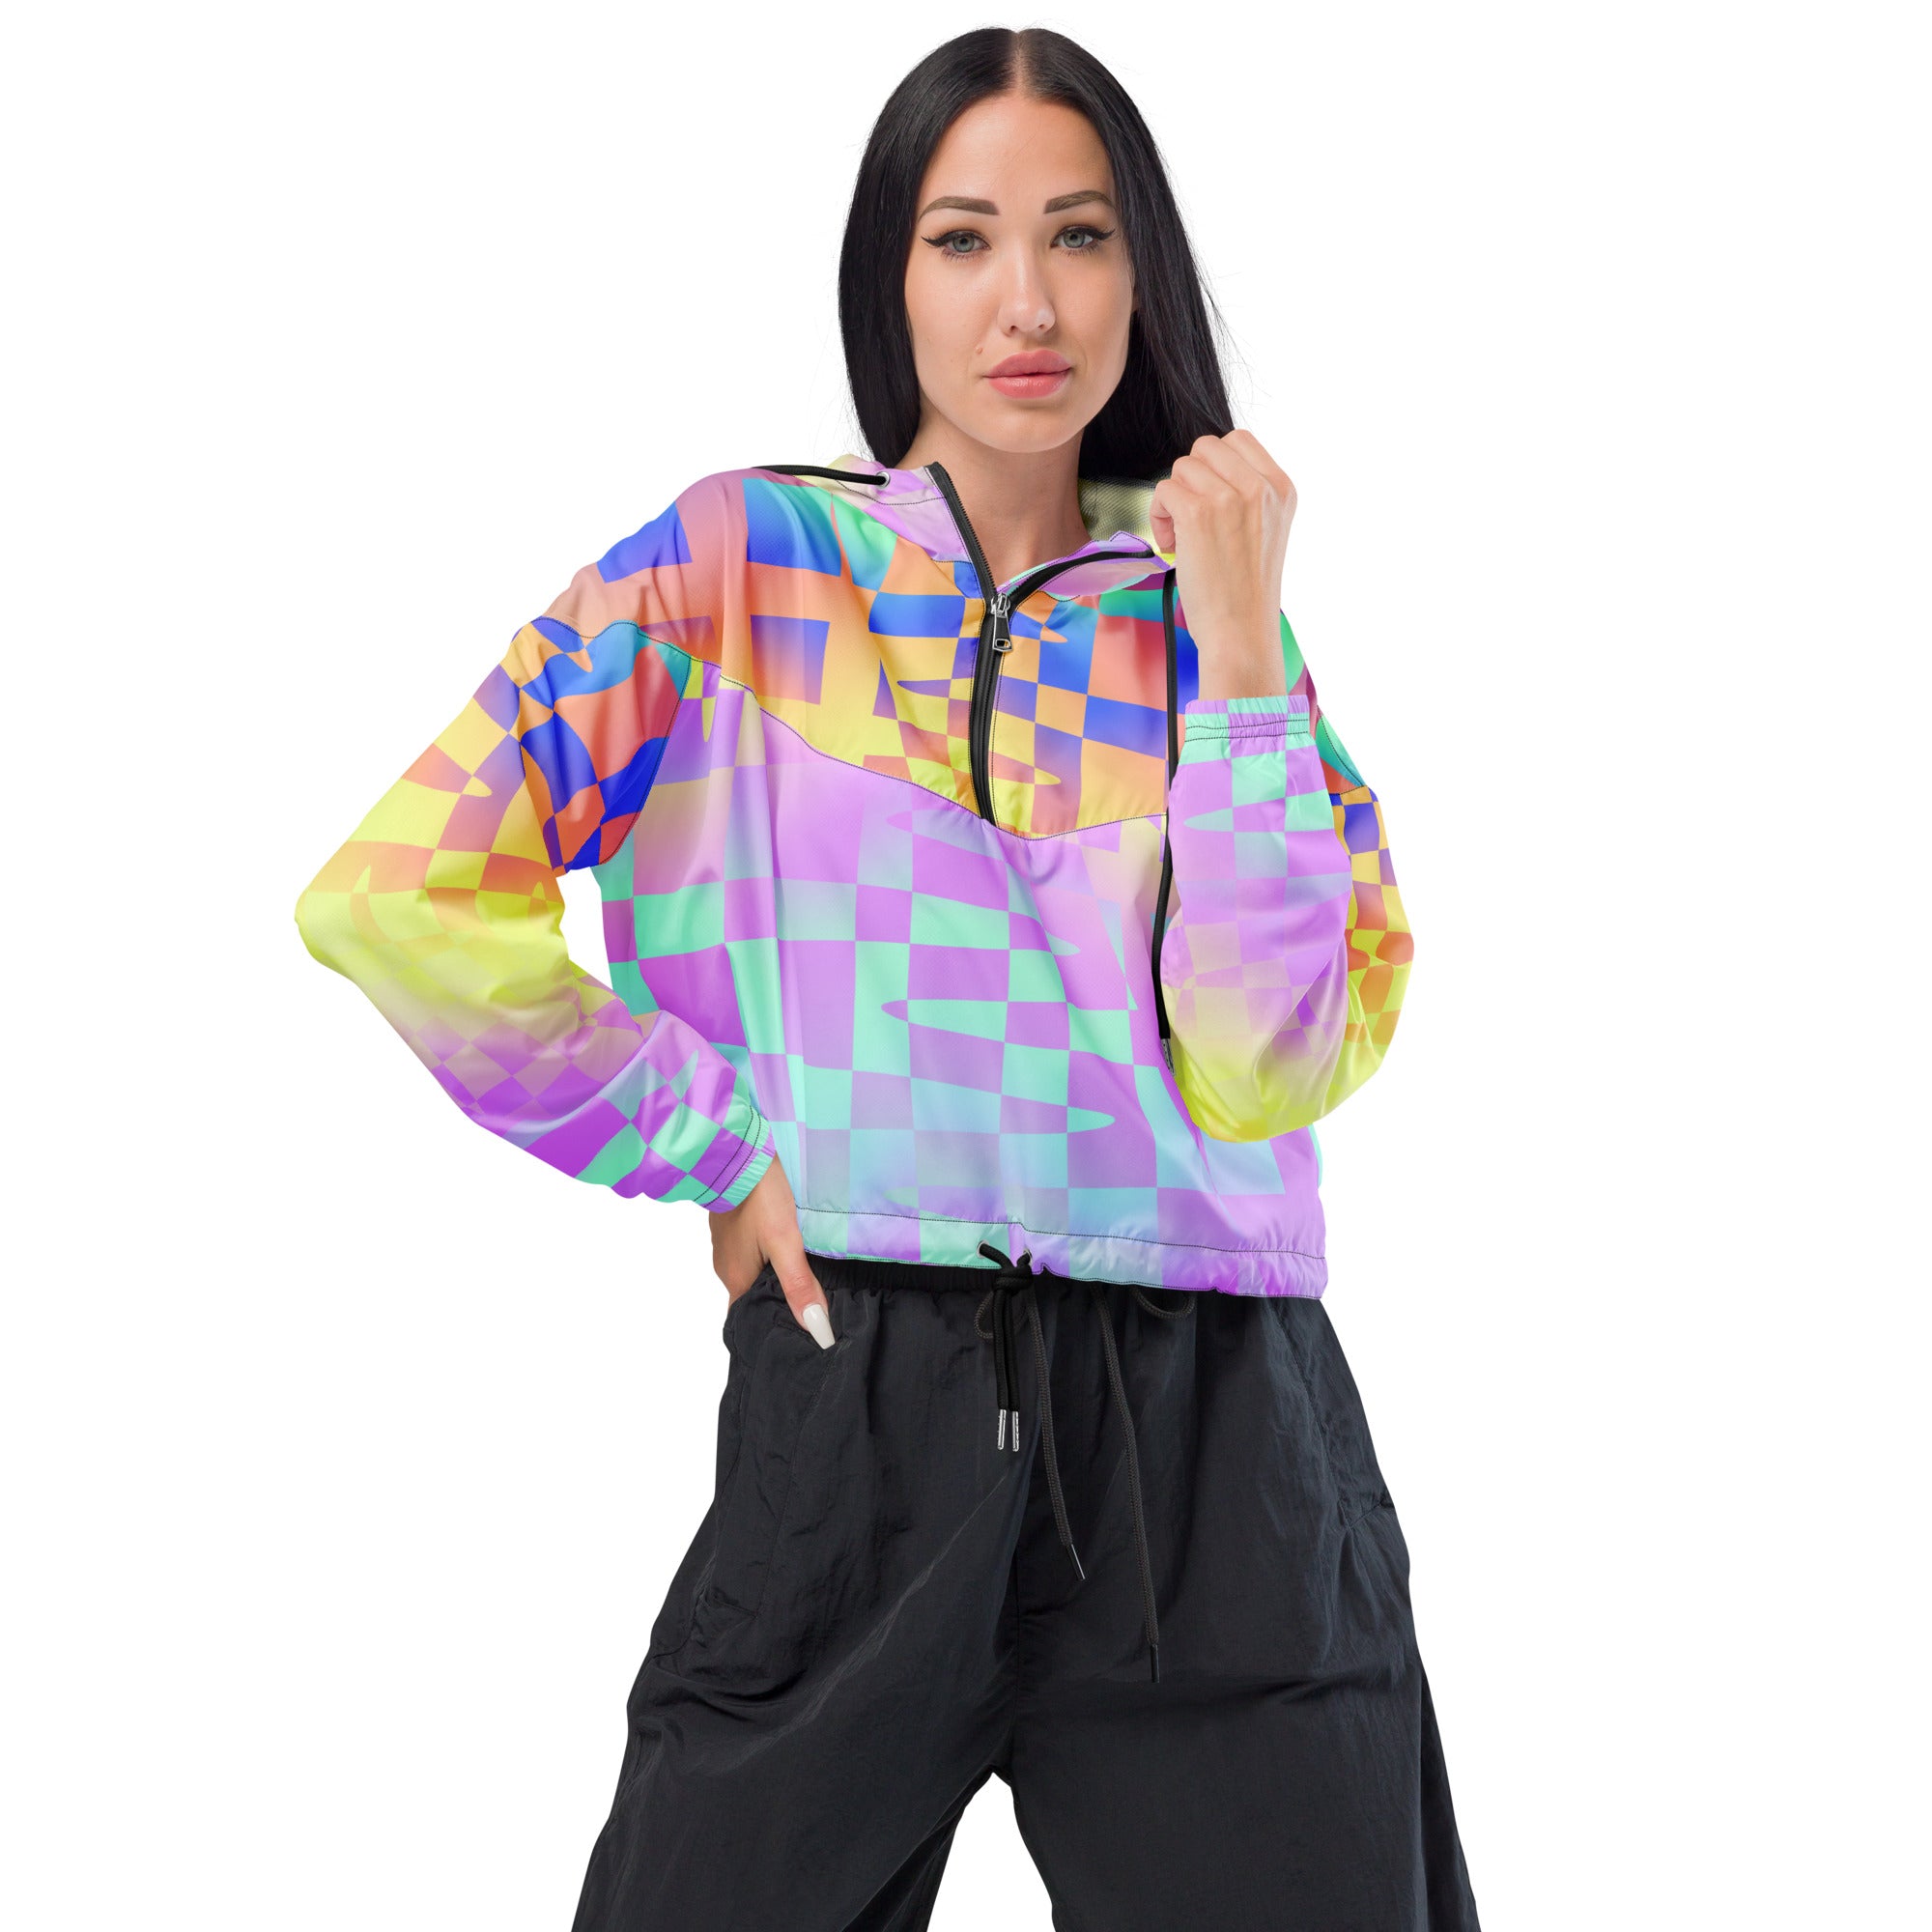 Fashionable Women's Cropped Windbreaker - Stay Chic and Protected from the Elements